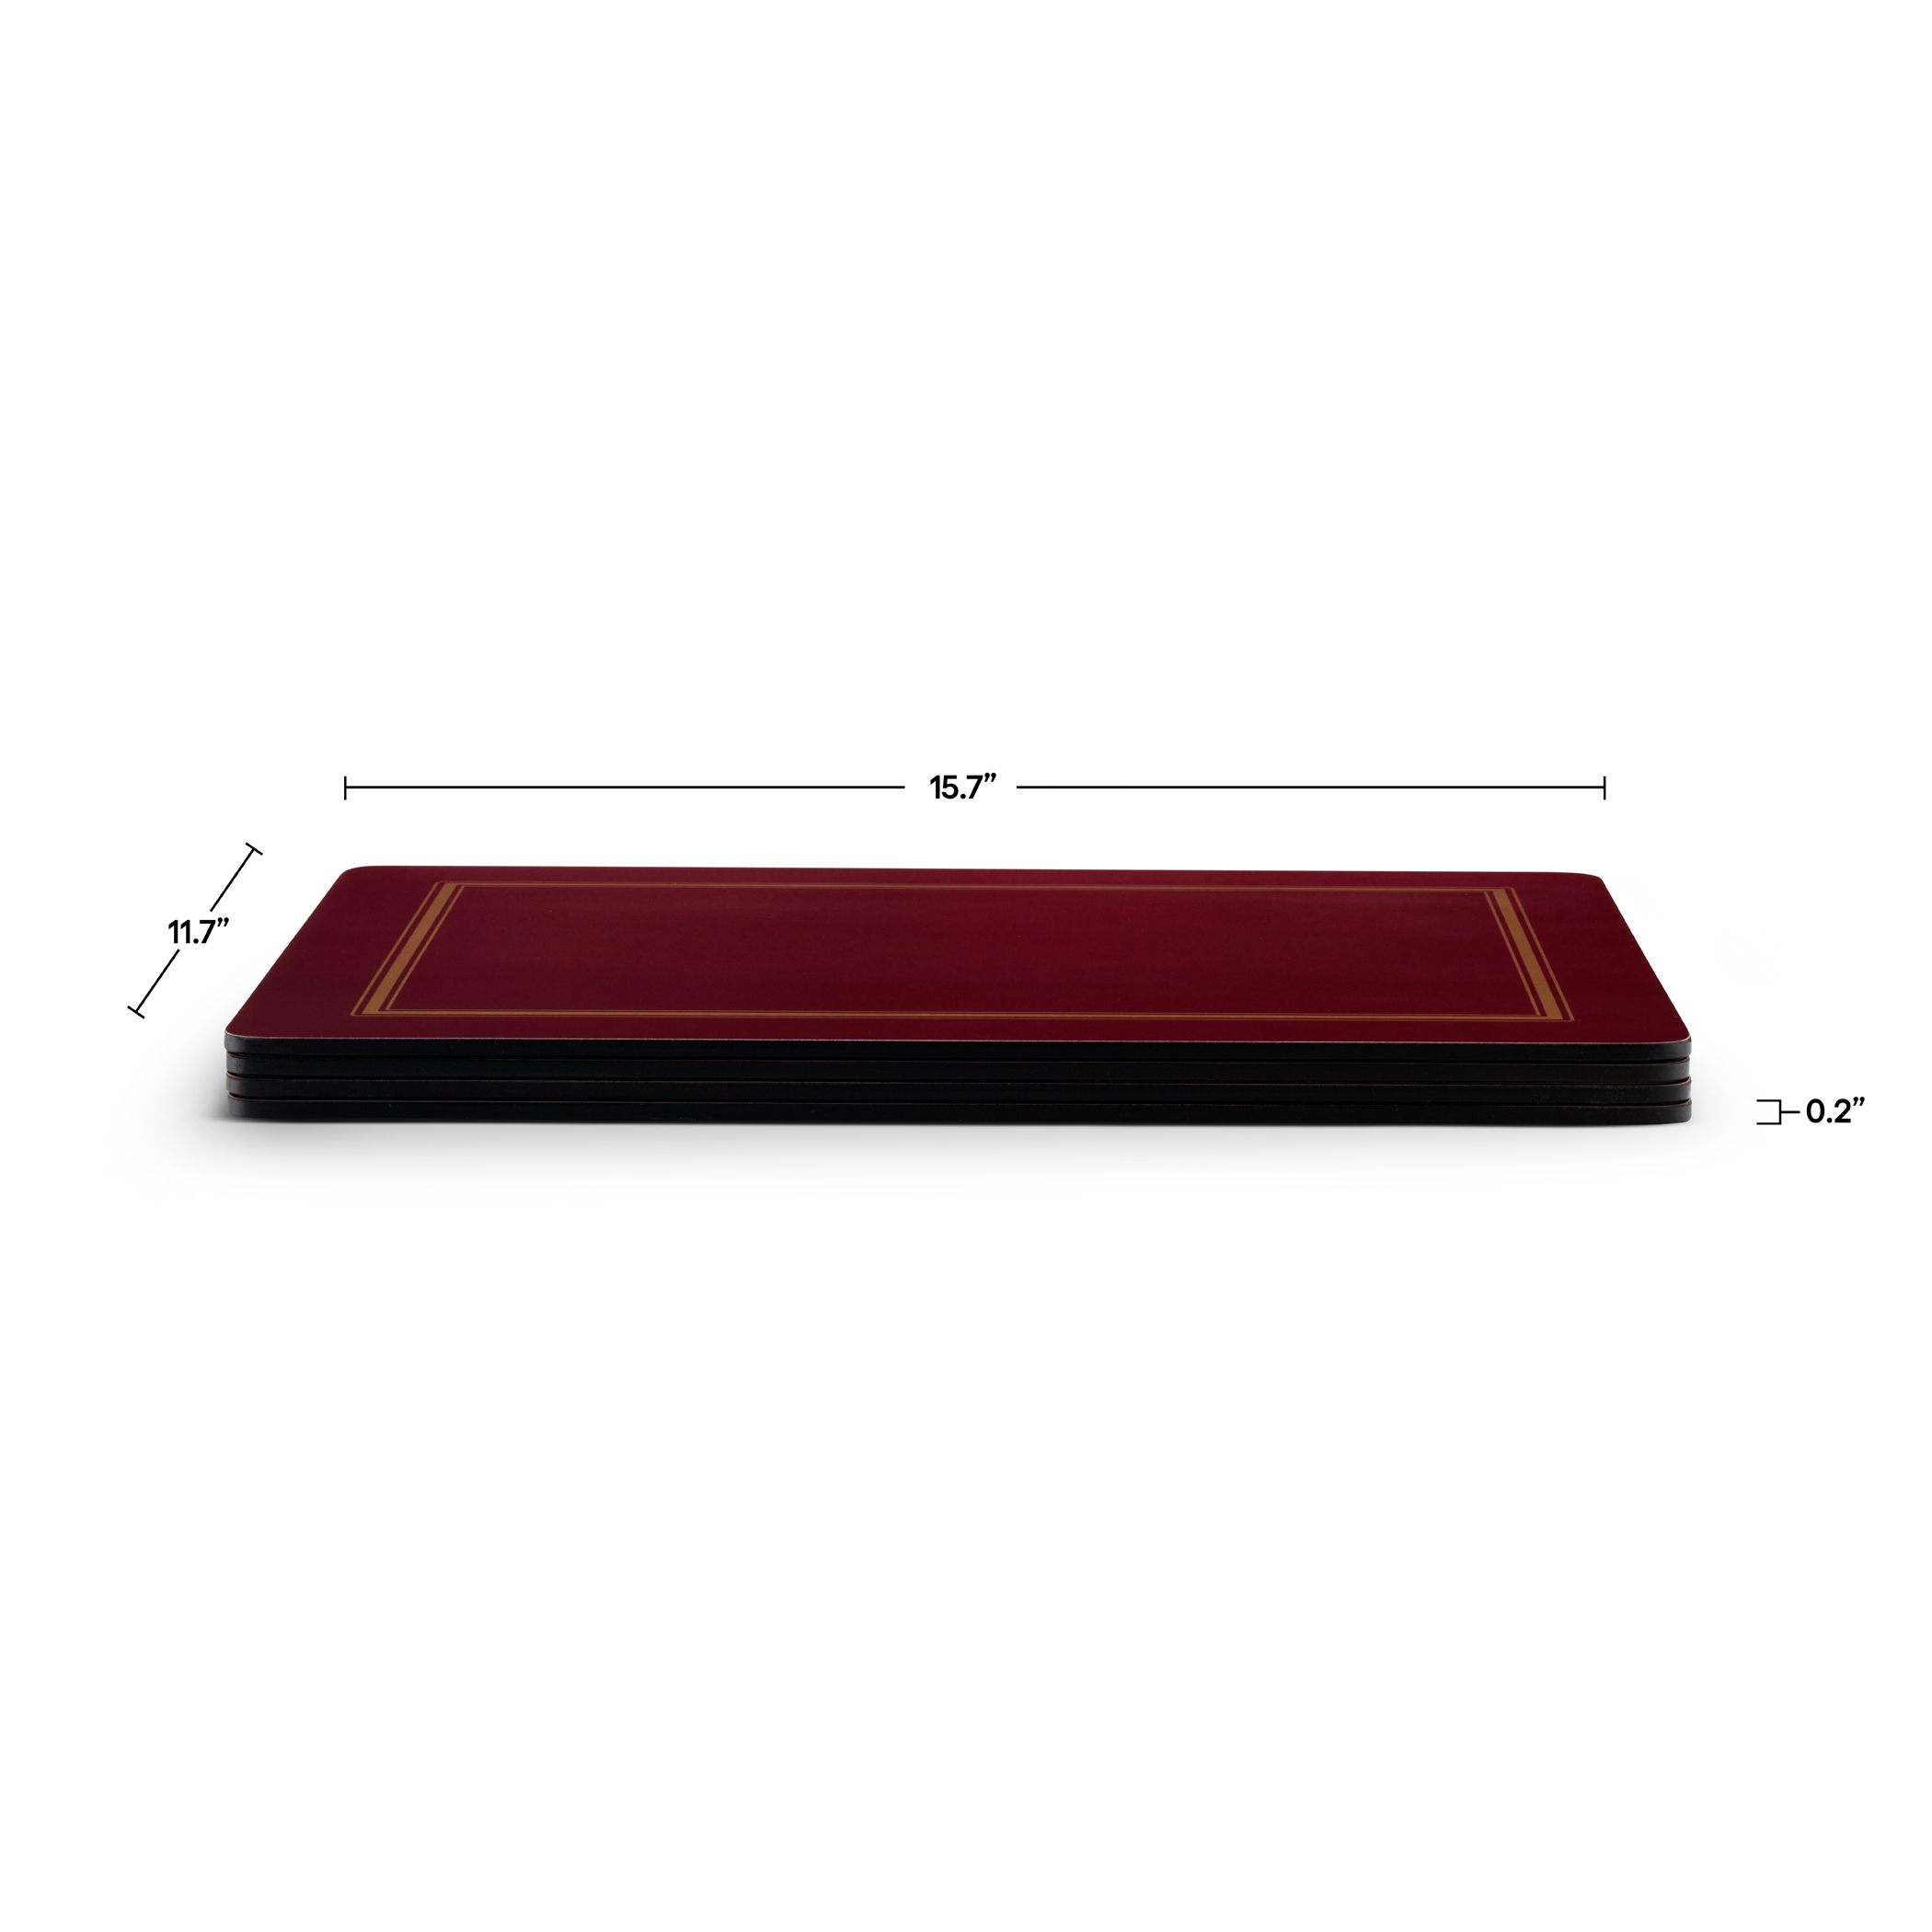 Pimpernel Classic Burgundy Placemats Set of 4 image number null